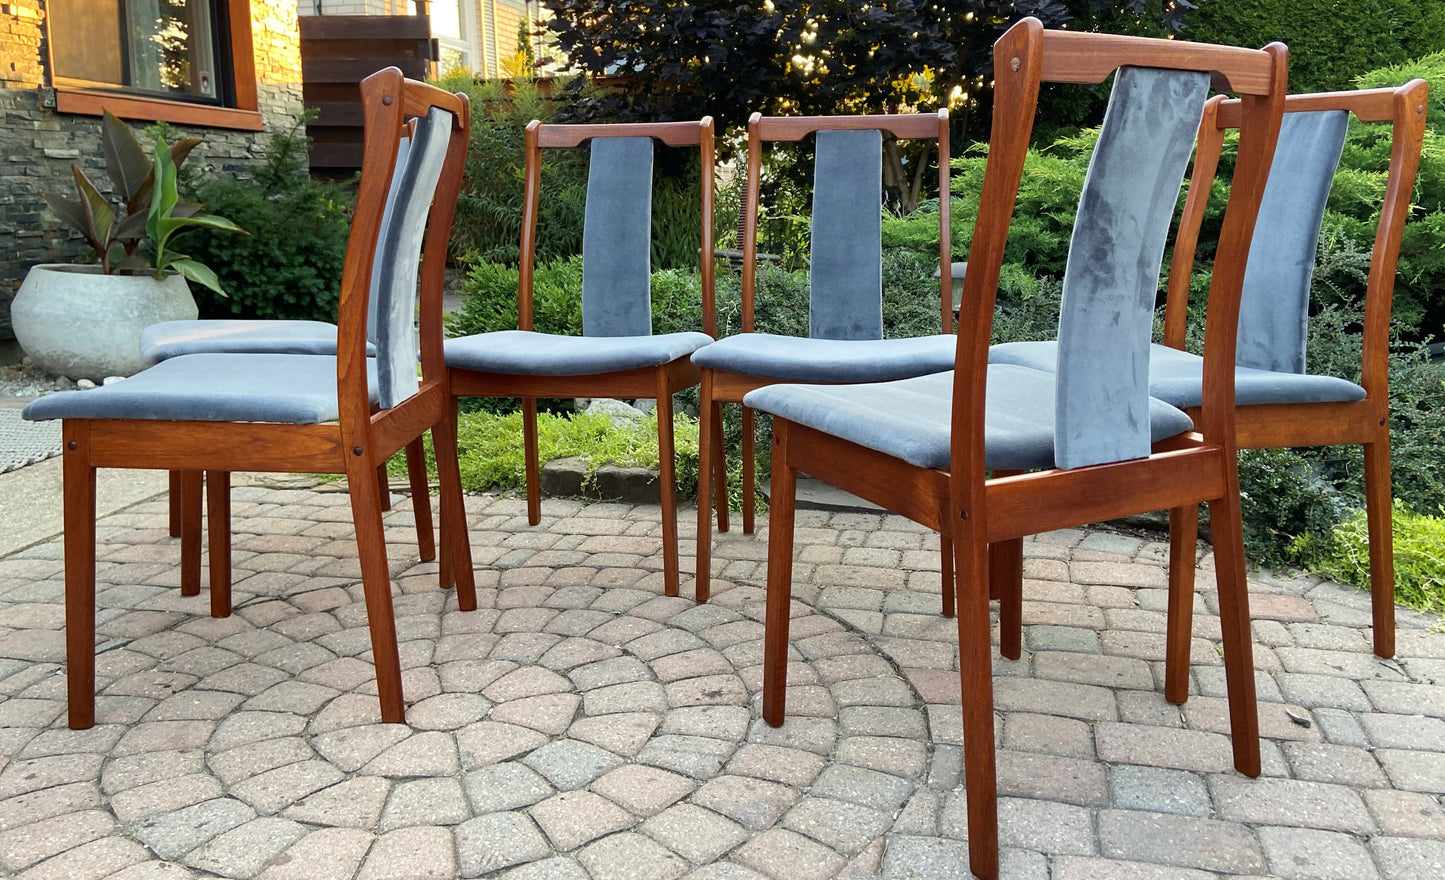 6 REFINISHED REUPHOLSTERED Danish Mid Century Modern Teak Chairs by VS, PERFECT